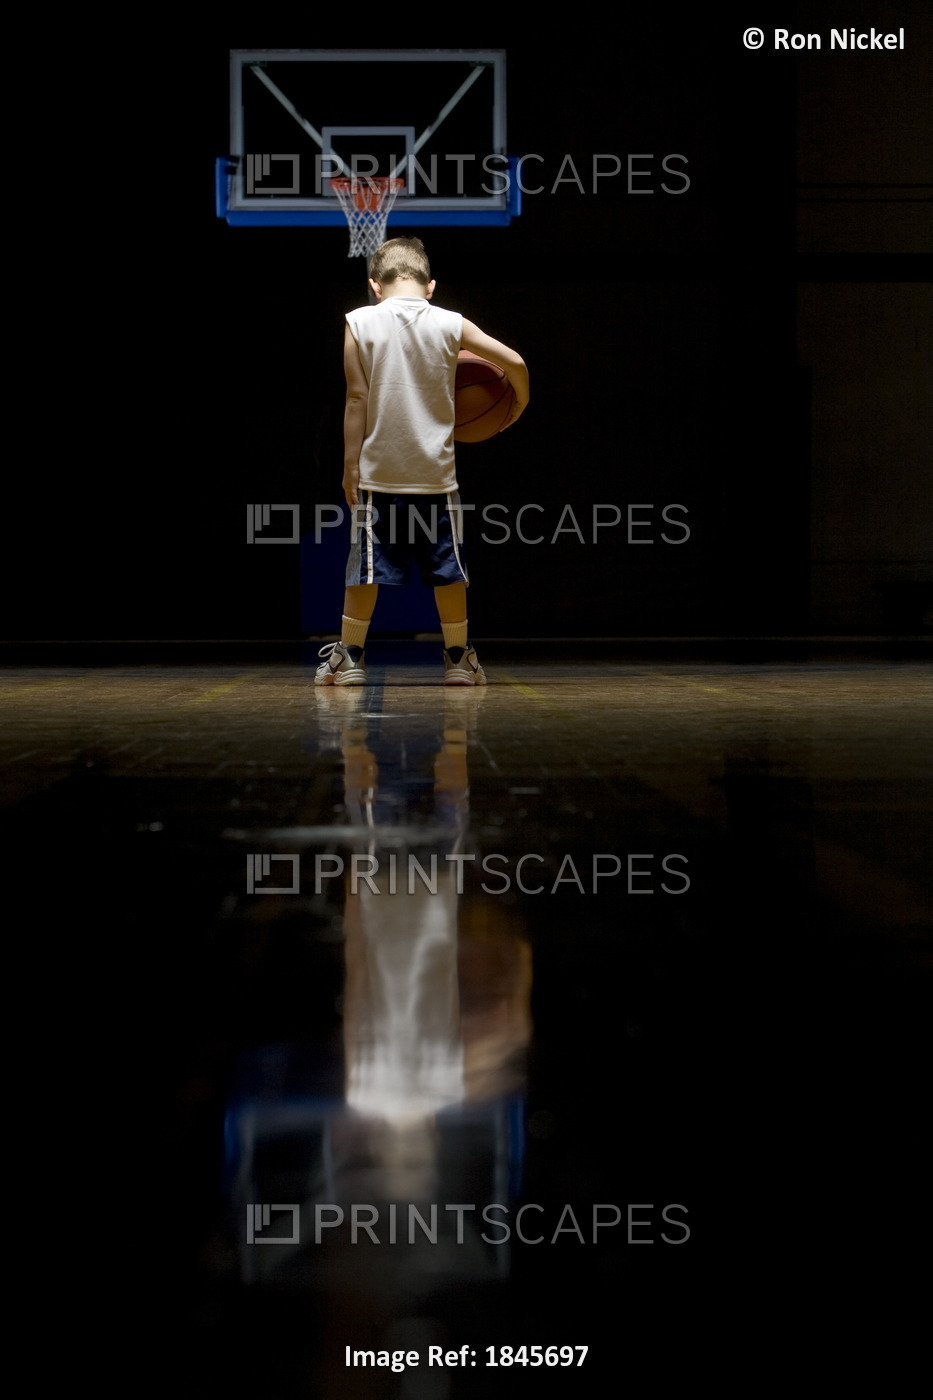 Young Boy Standing On Basketball Court Looking Solemn